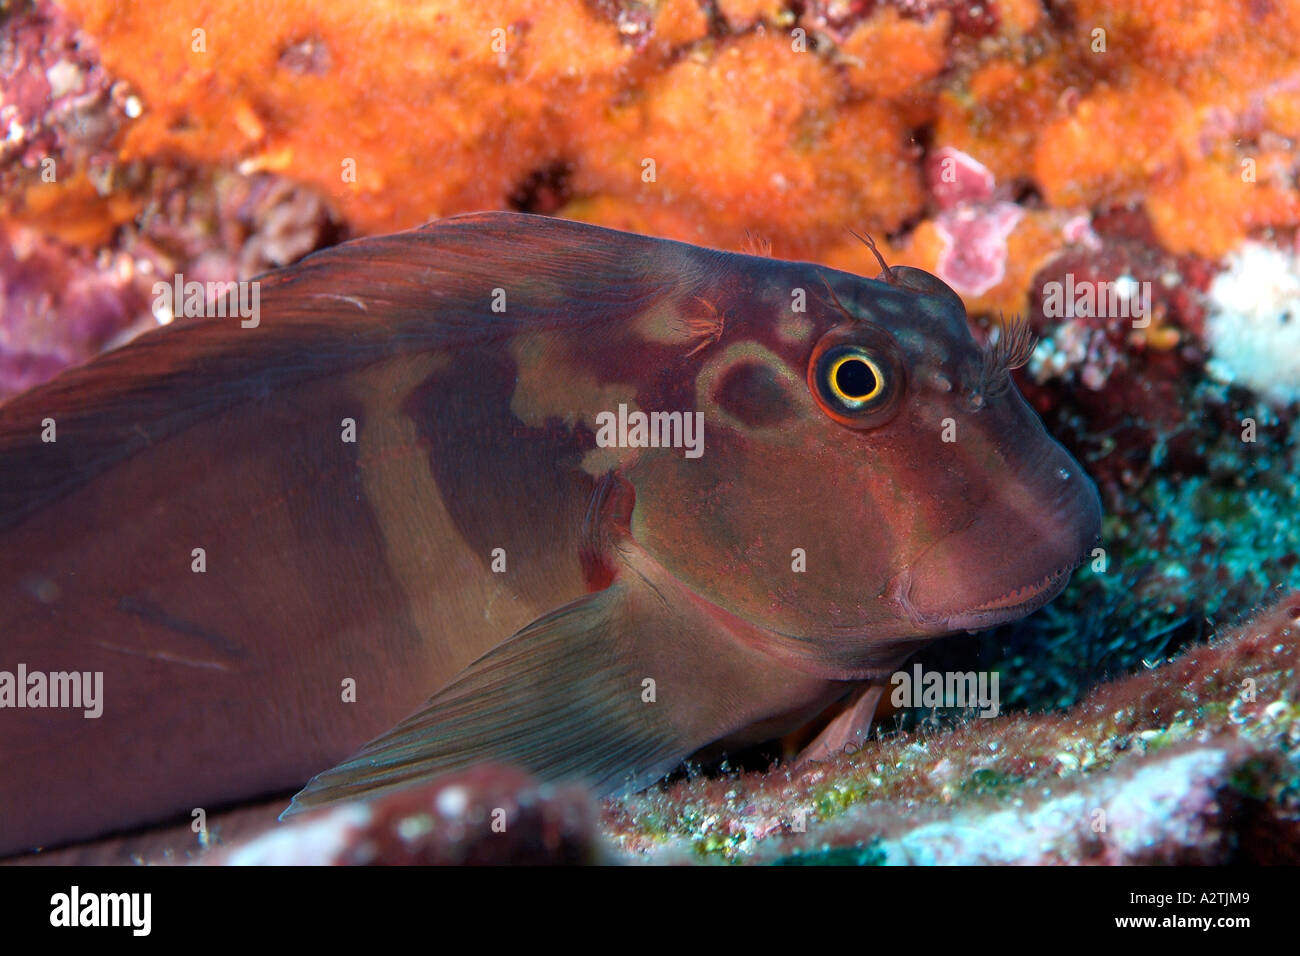 Panamic fanged blenny in the Galapagos Archipelago Stock Photo